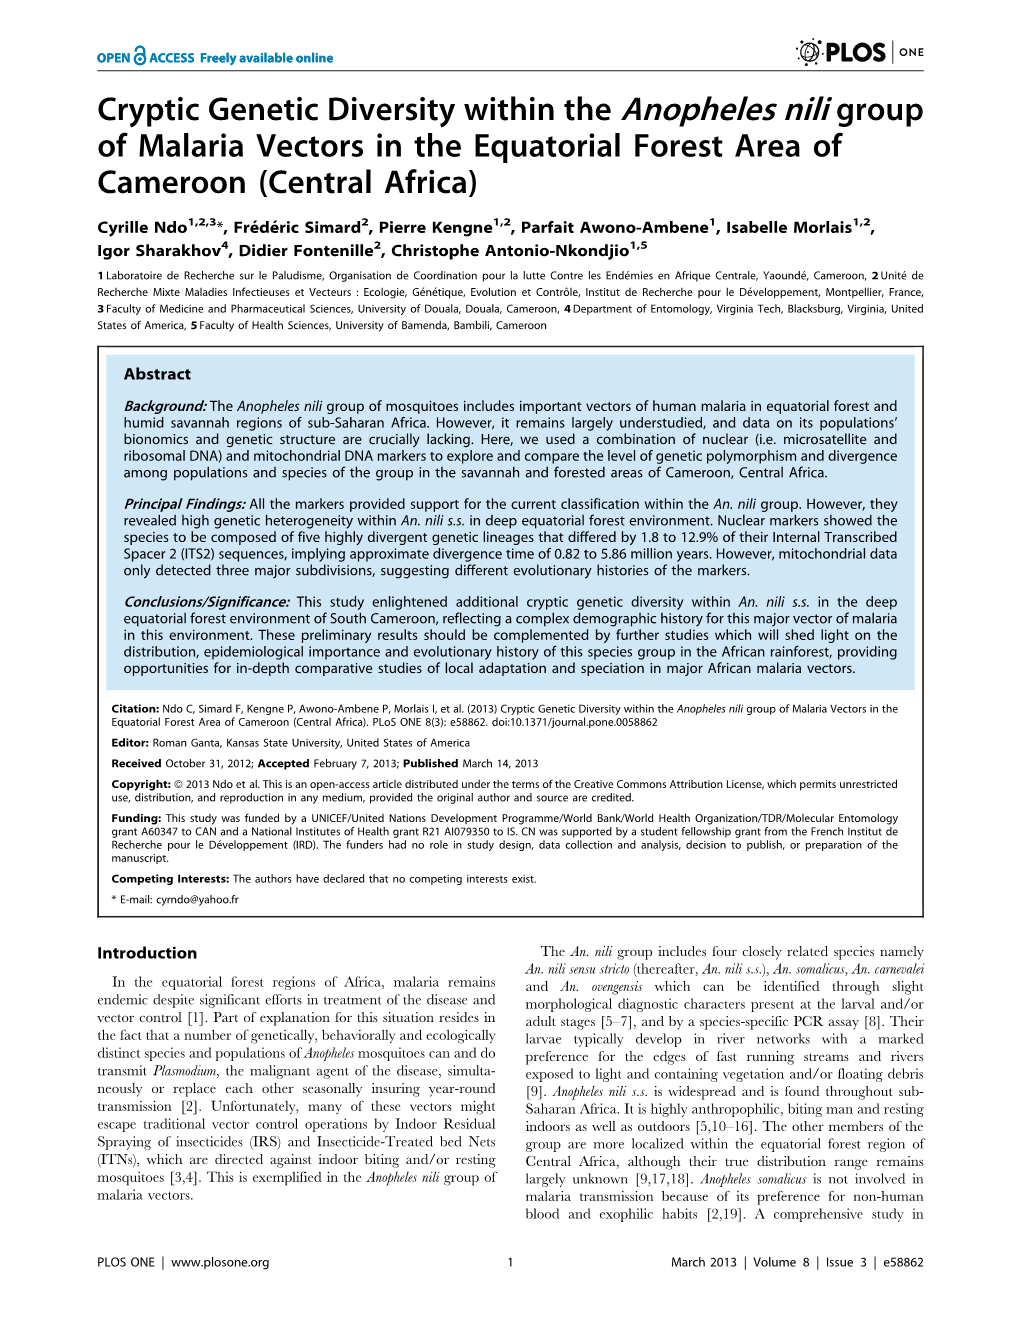 Cryptic Genetic Diversity Within the Anopheles Nili Group of Malaria Vectors in the Equatorial Forest Area of Cameroon (Central Africa)